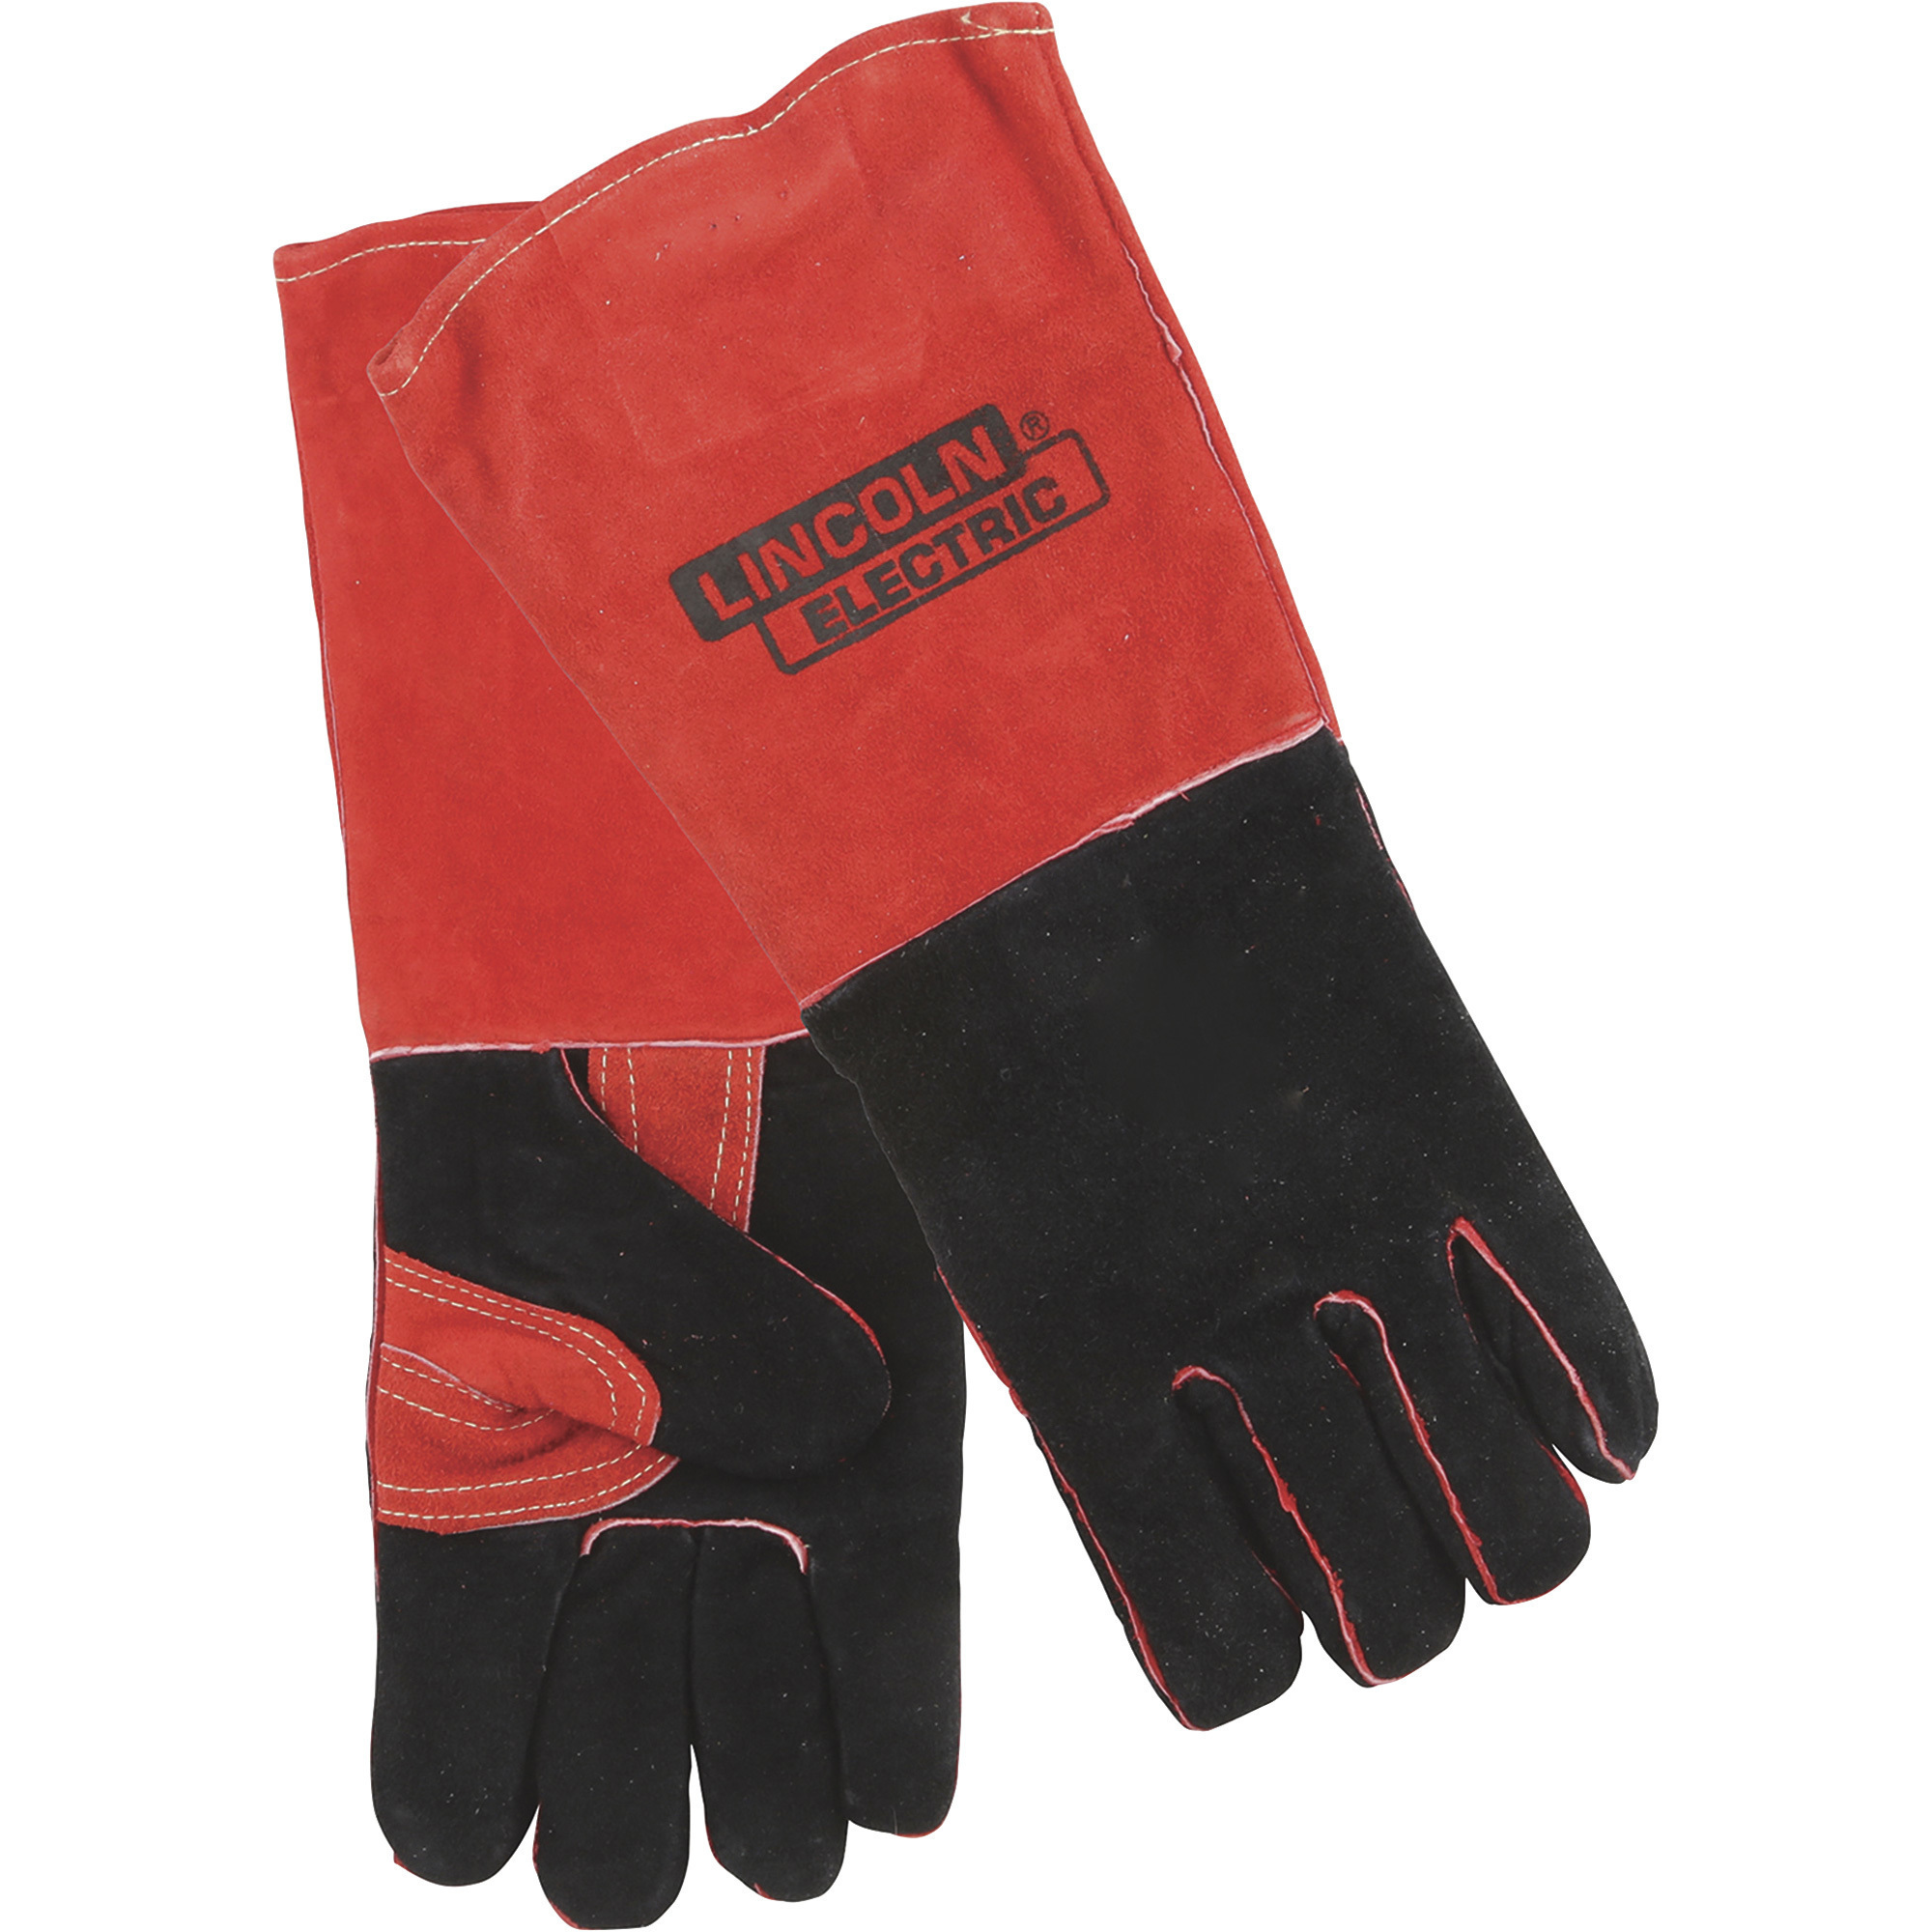 Lincoln Electric Industrial Welding Gloves, Leather, Red and Black, One Size Fits Most, Pair, Model KH643